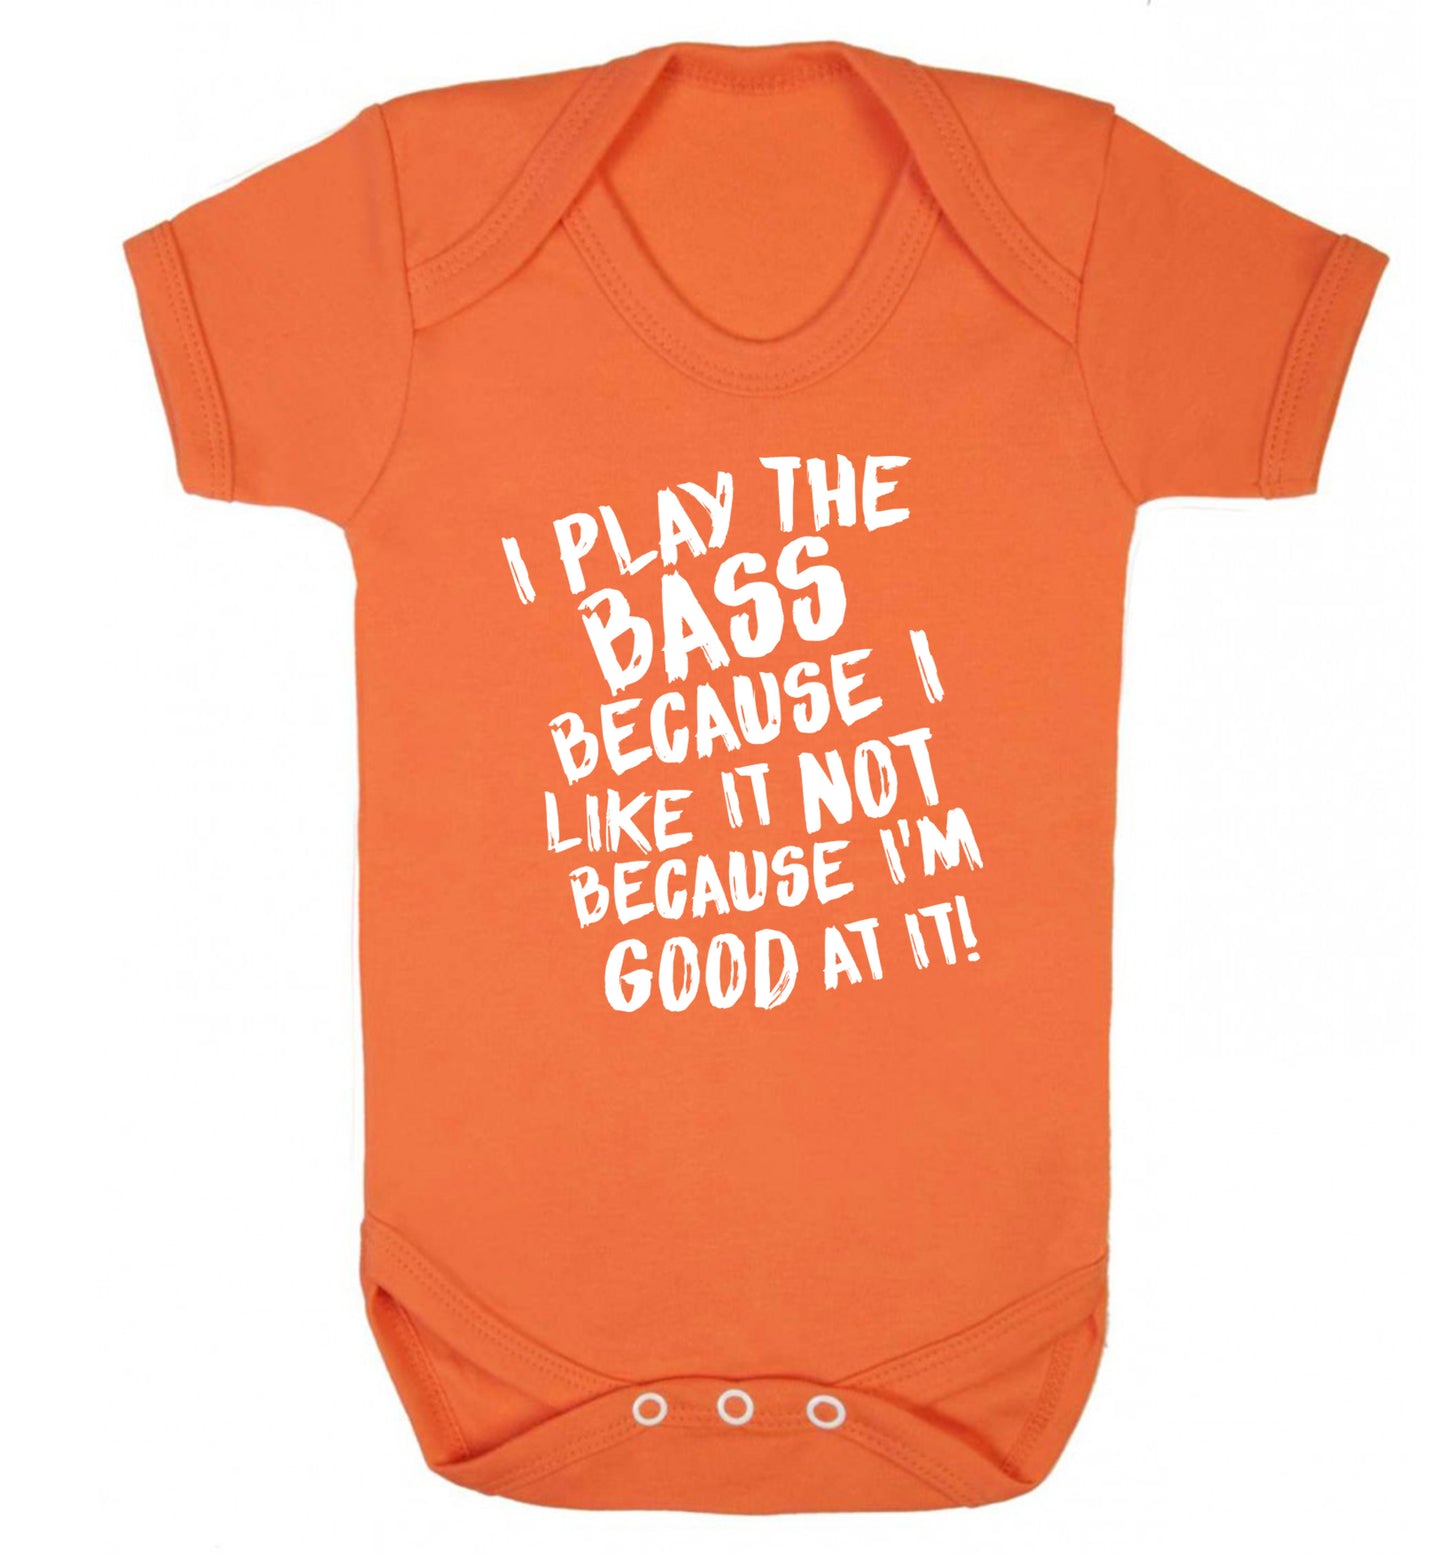 I play the bass because I like it not because I'm good at it Baby Vest orange 18-24 months